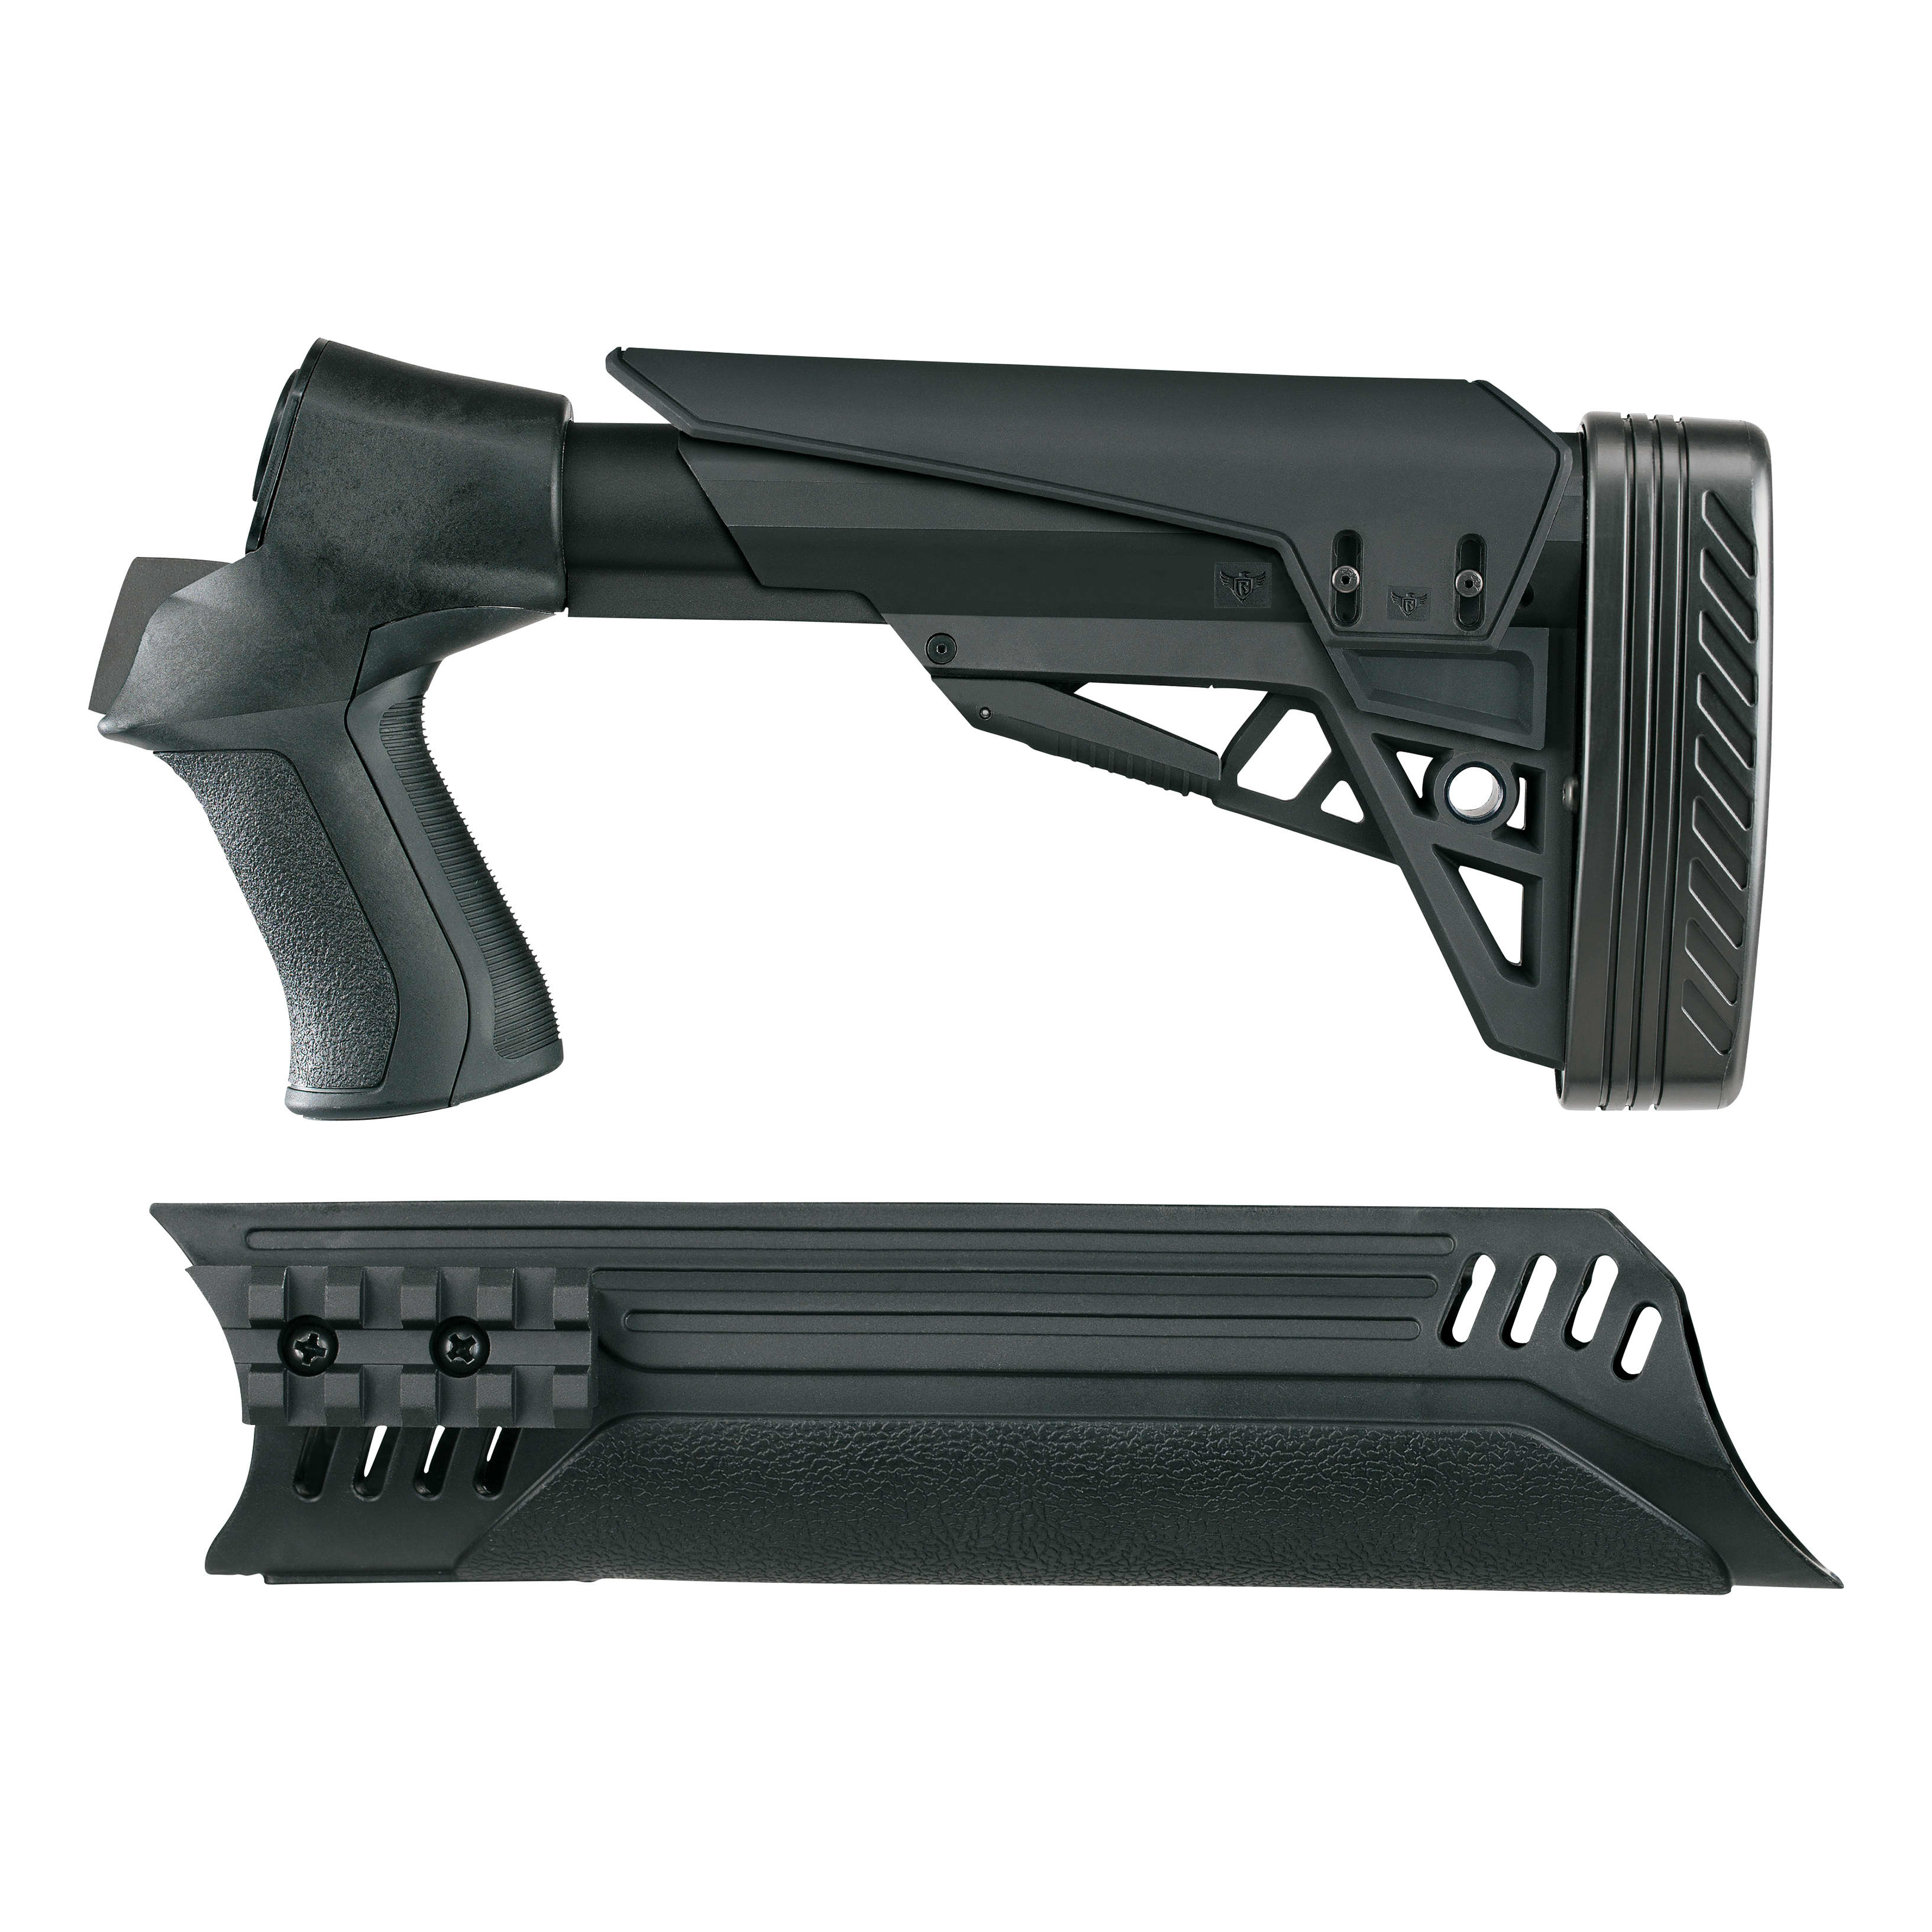 ATI MRSW Talon T3 Adjustable TactLite Shotgun Stock and Forend with Scorpion Recoil System